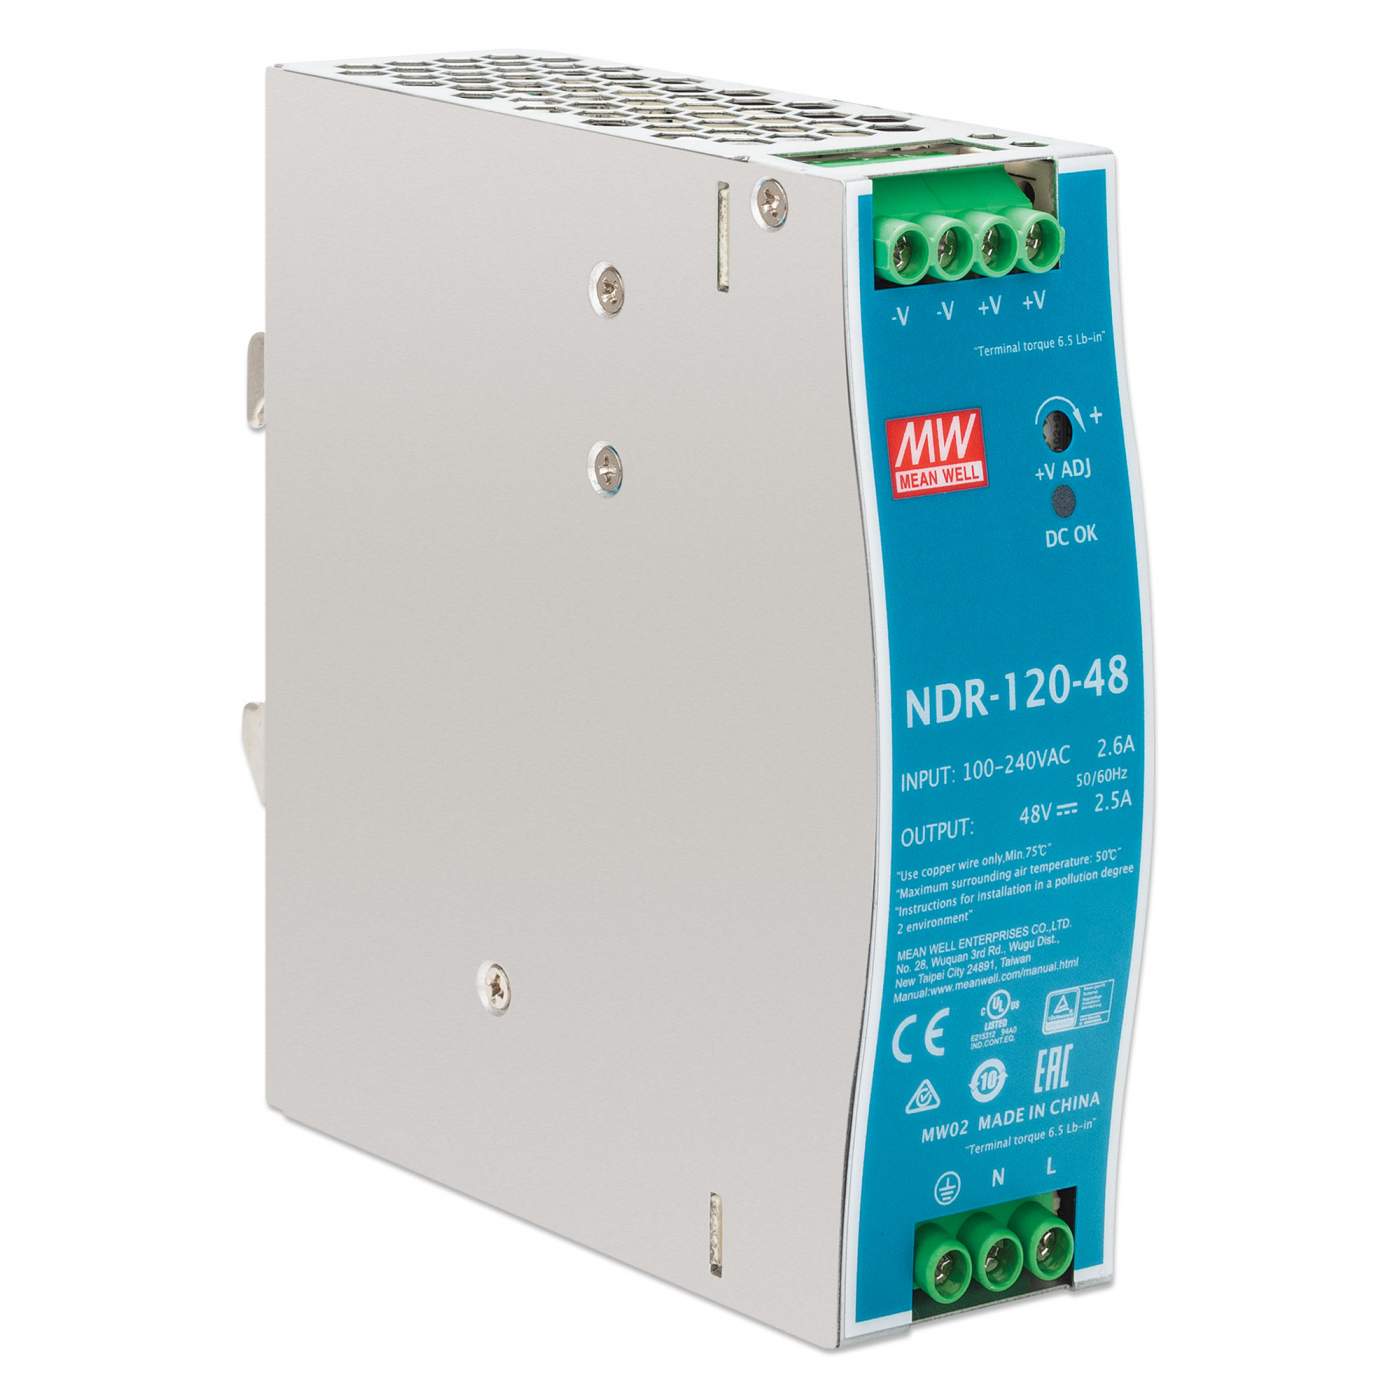 DIN rail-mounted industrial power-supply fundamentals